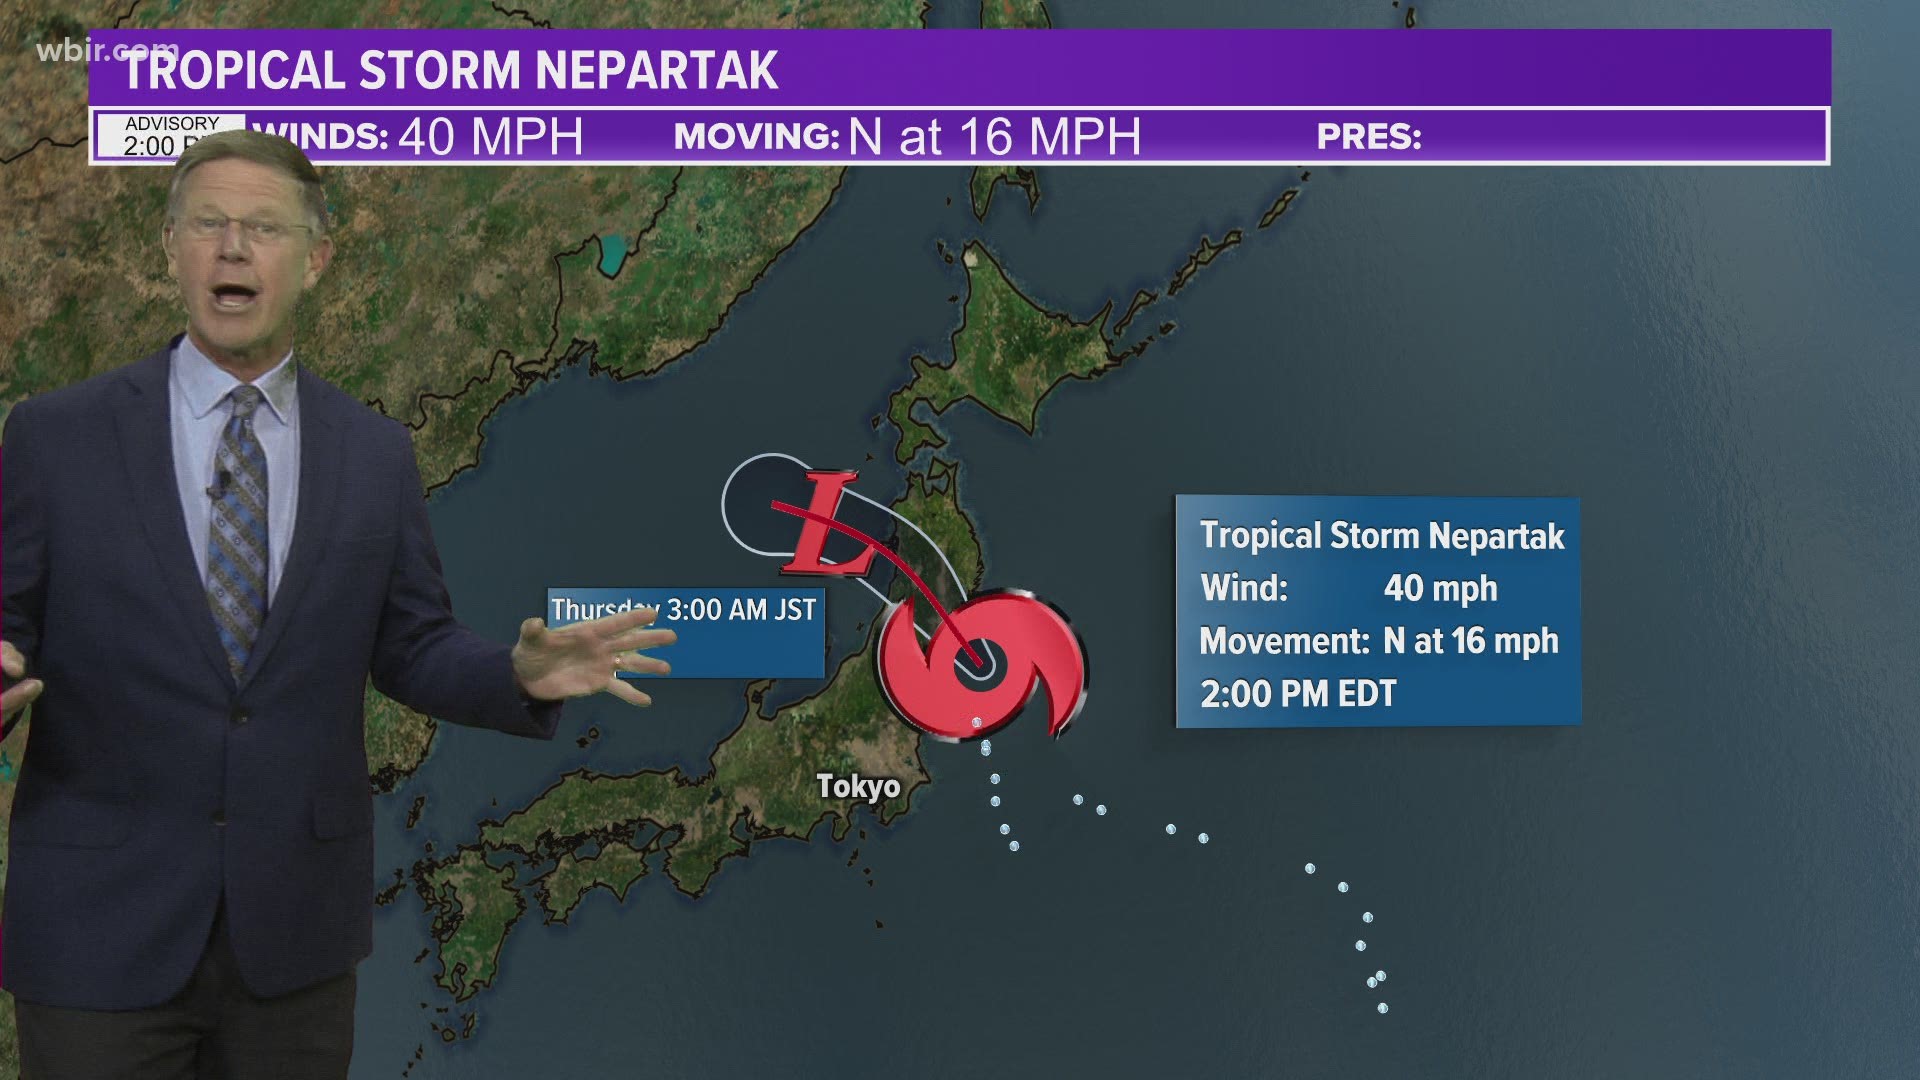 Todd takes a look at a tropical storm that's passing near Tokyo, Japan during the Olympics.